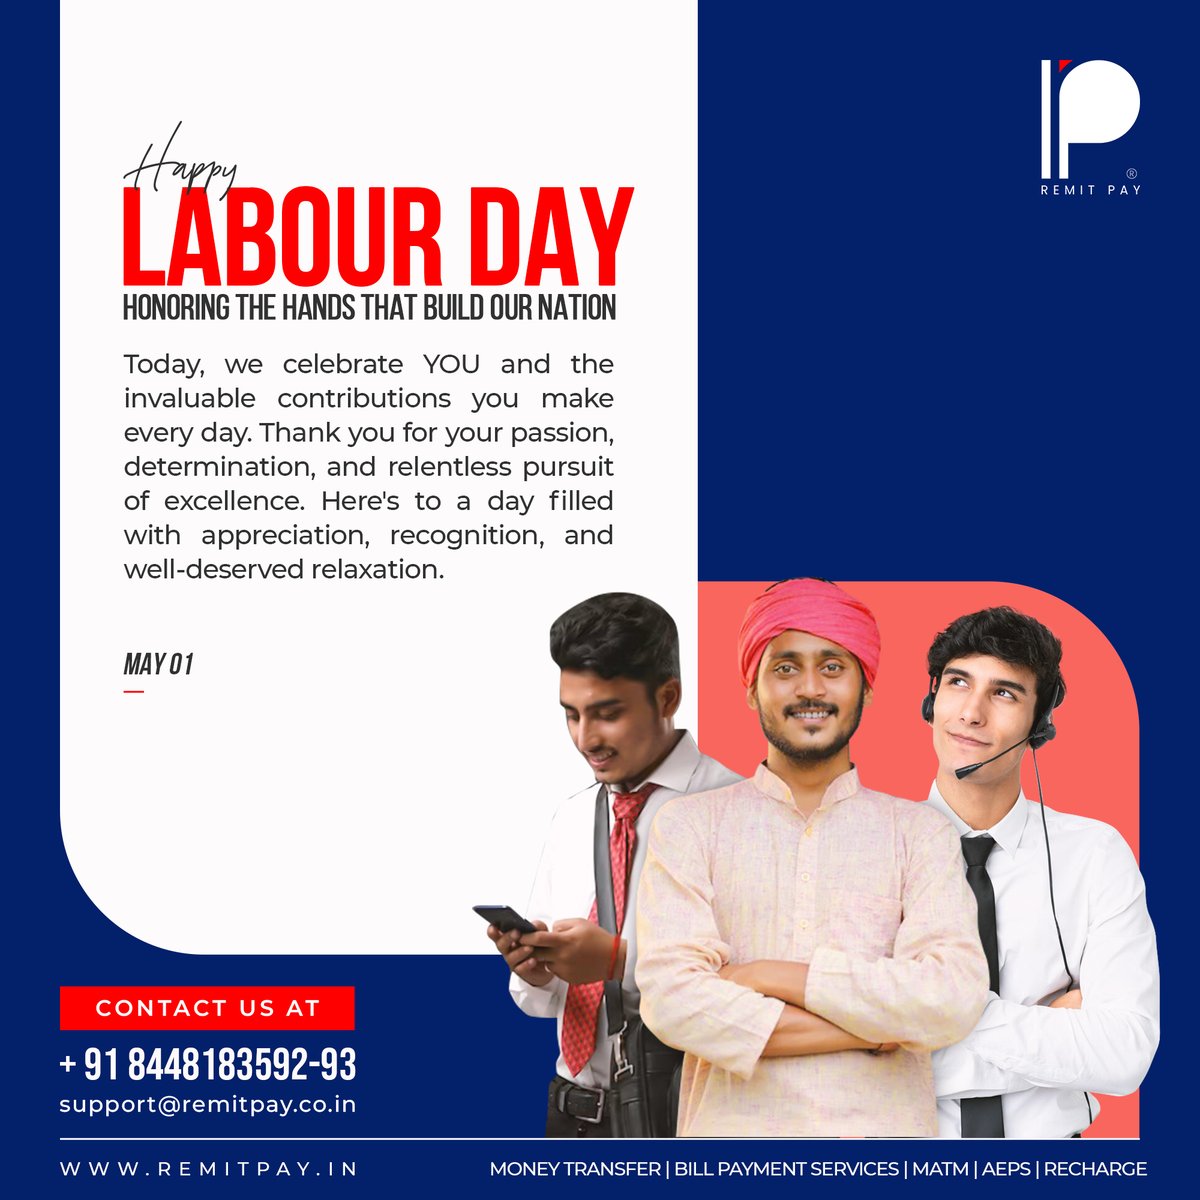 Happy Labour Day: Honoring the Hands that Build our Nation

#financialservice #financialservices #fintech #fintechs #fintechstartup #fintechsolutions #fintechrevolution #internationalworkerday #InternationalWorkersDay #labourday #labourday2024 #Labour #labour